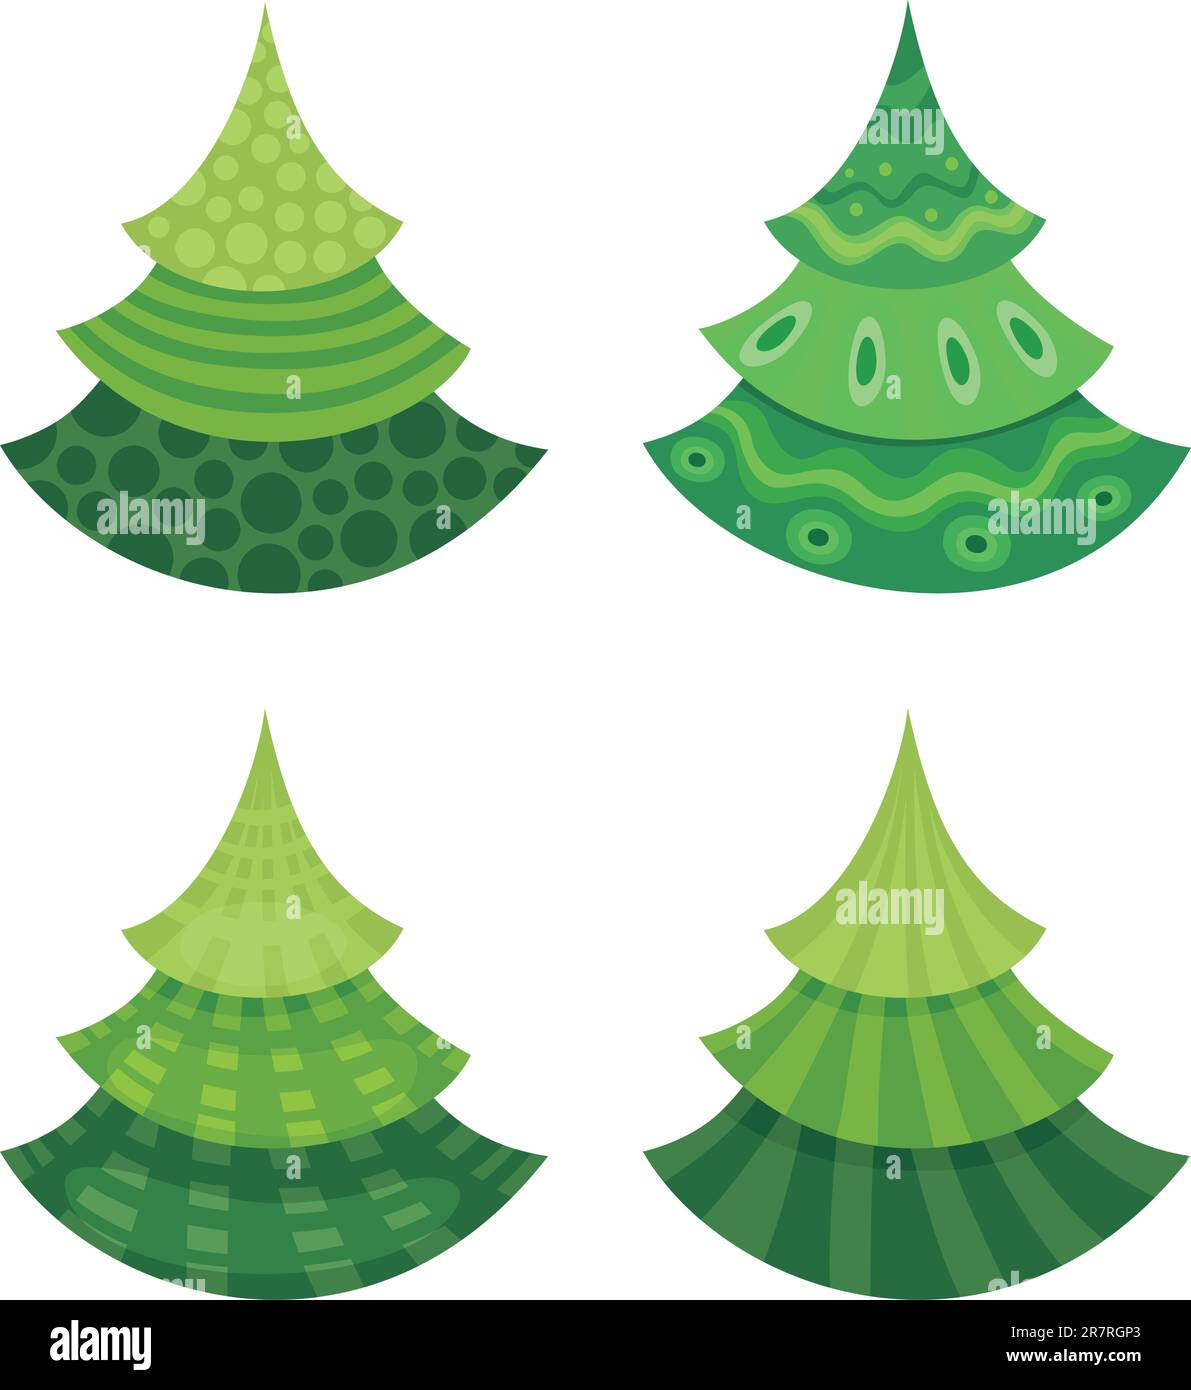 vector illustration of a christmas tree Stock Vector